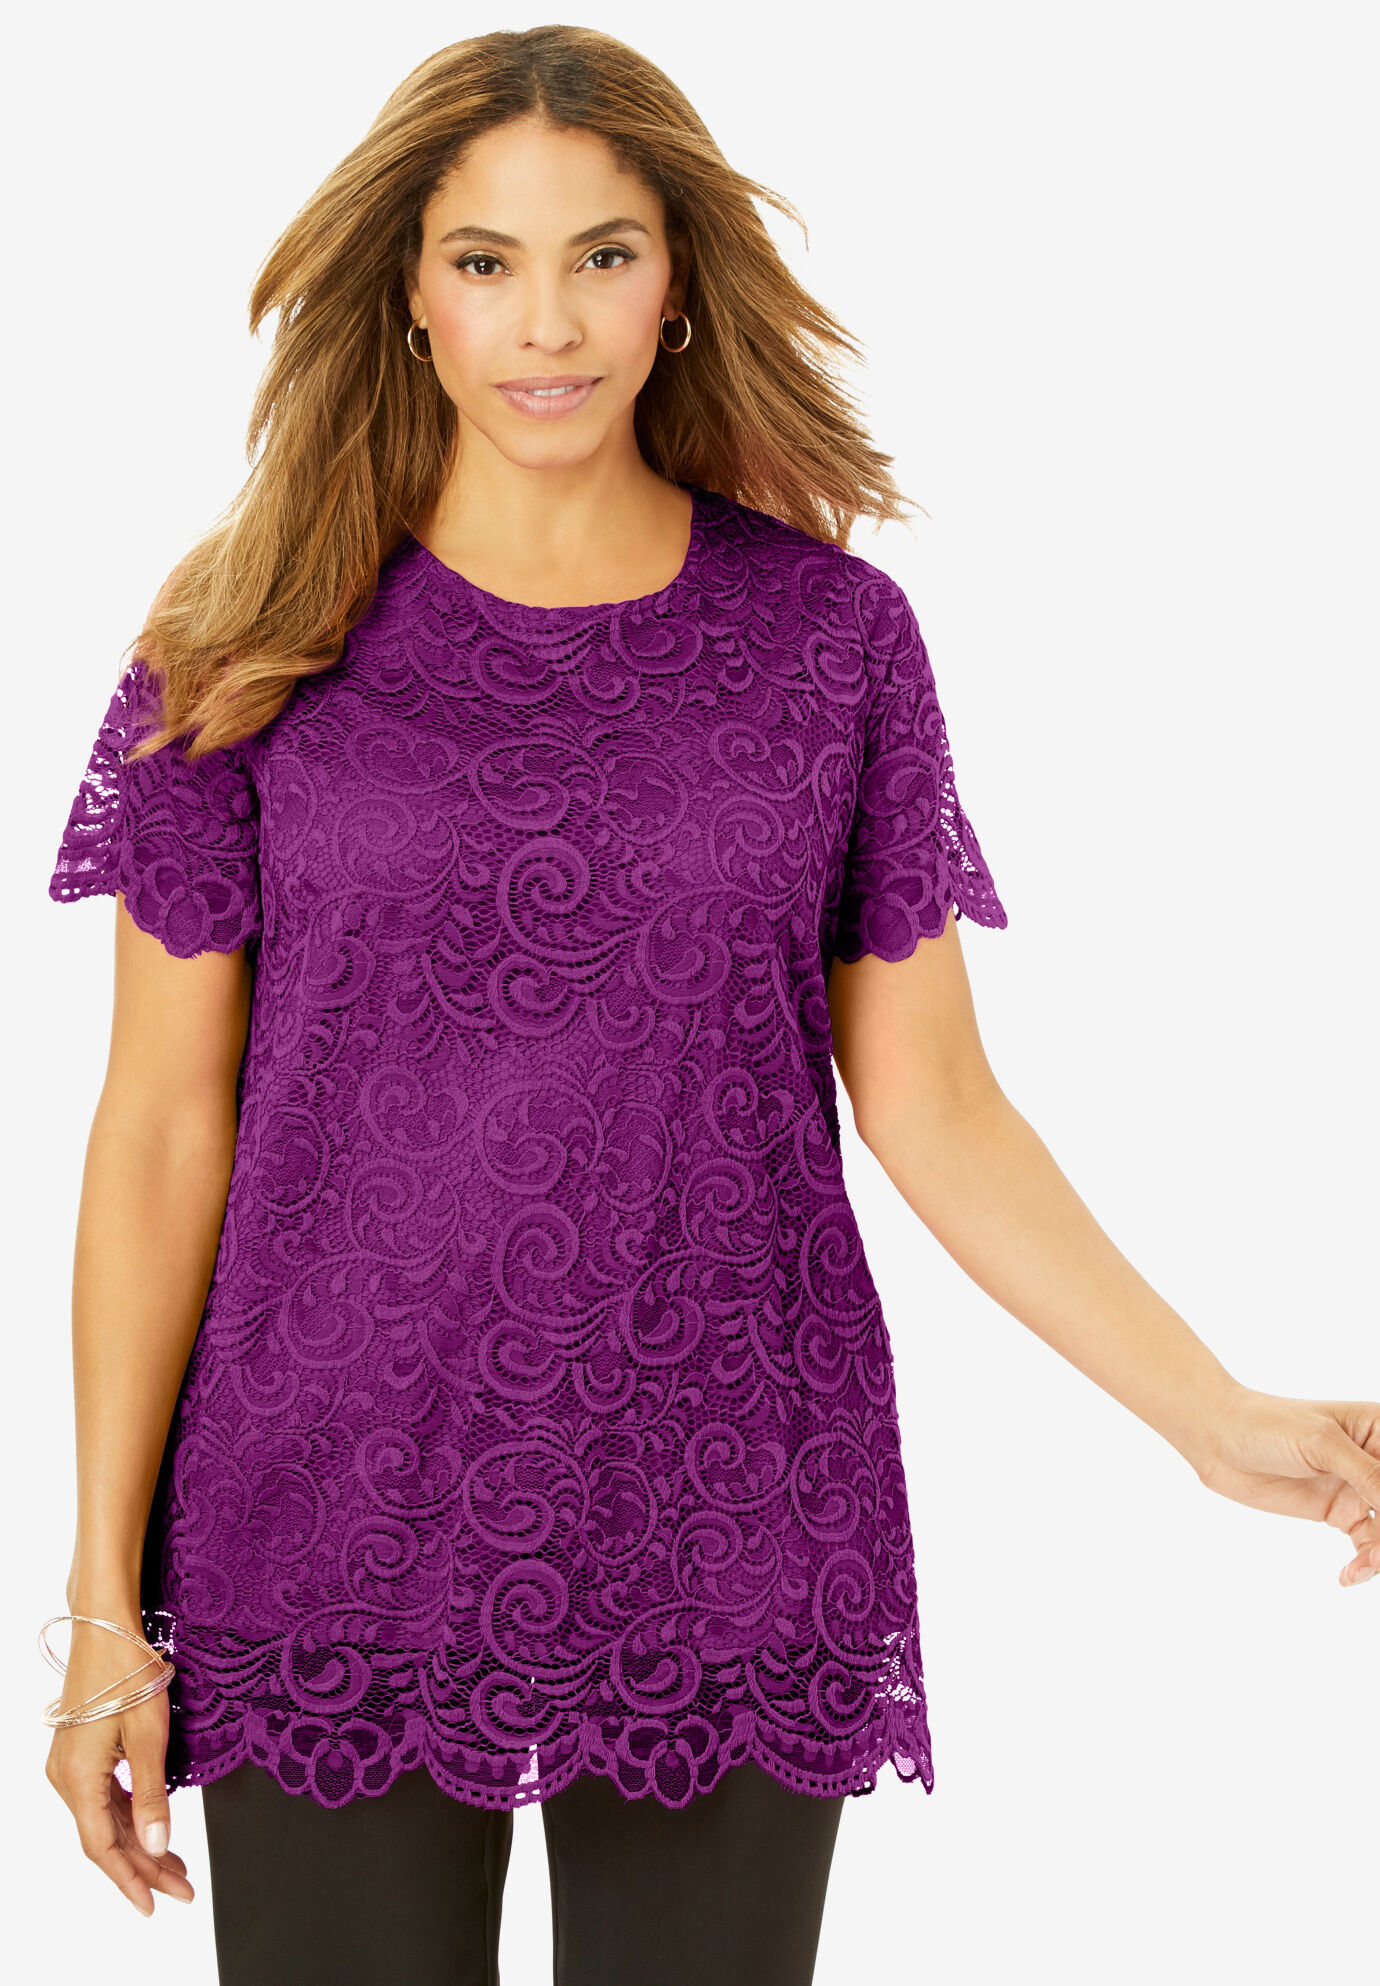 Lace Tunic | Woman Within